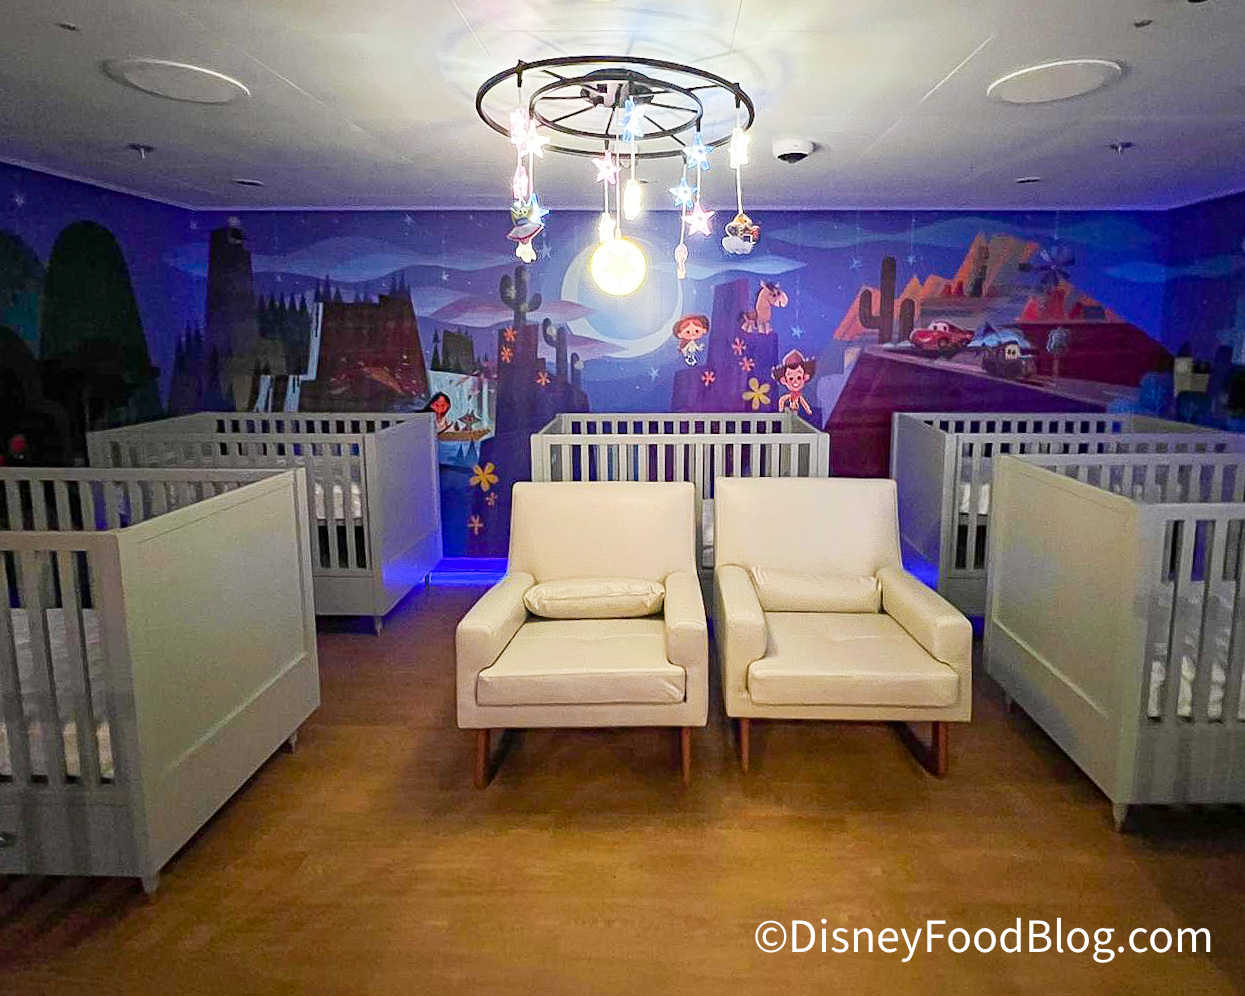 Youth clubs and childcare aboard the Disney Wonder - WDW Prep School